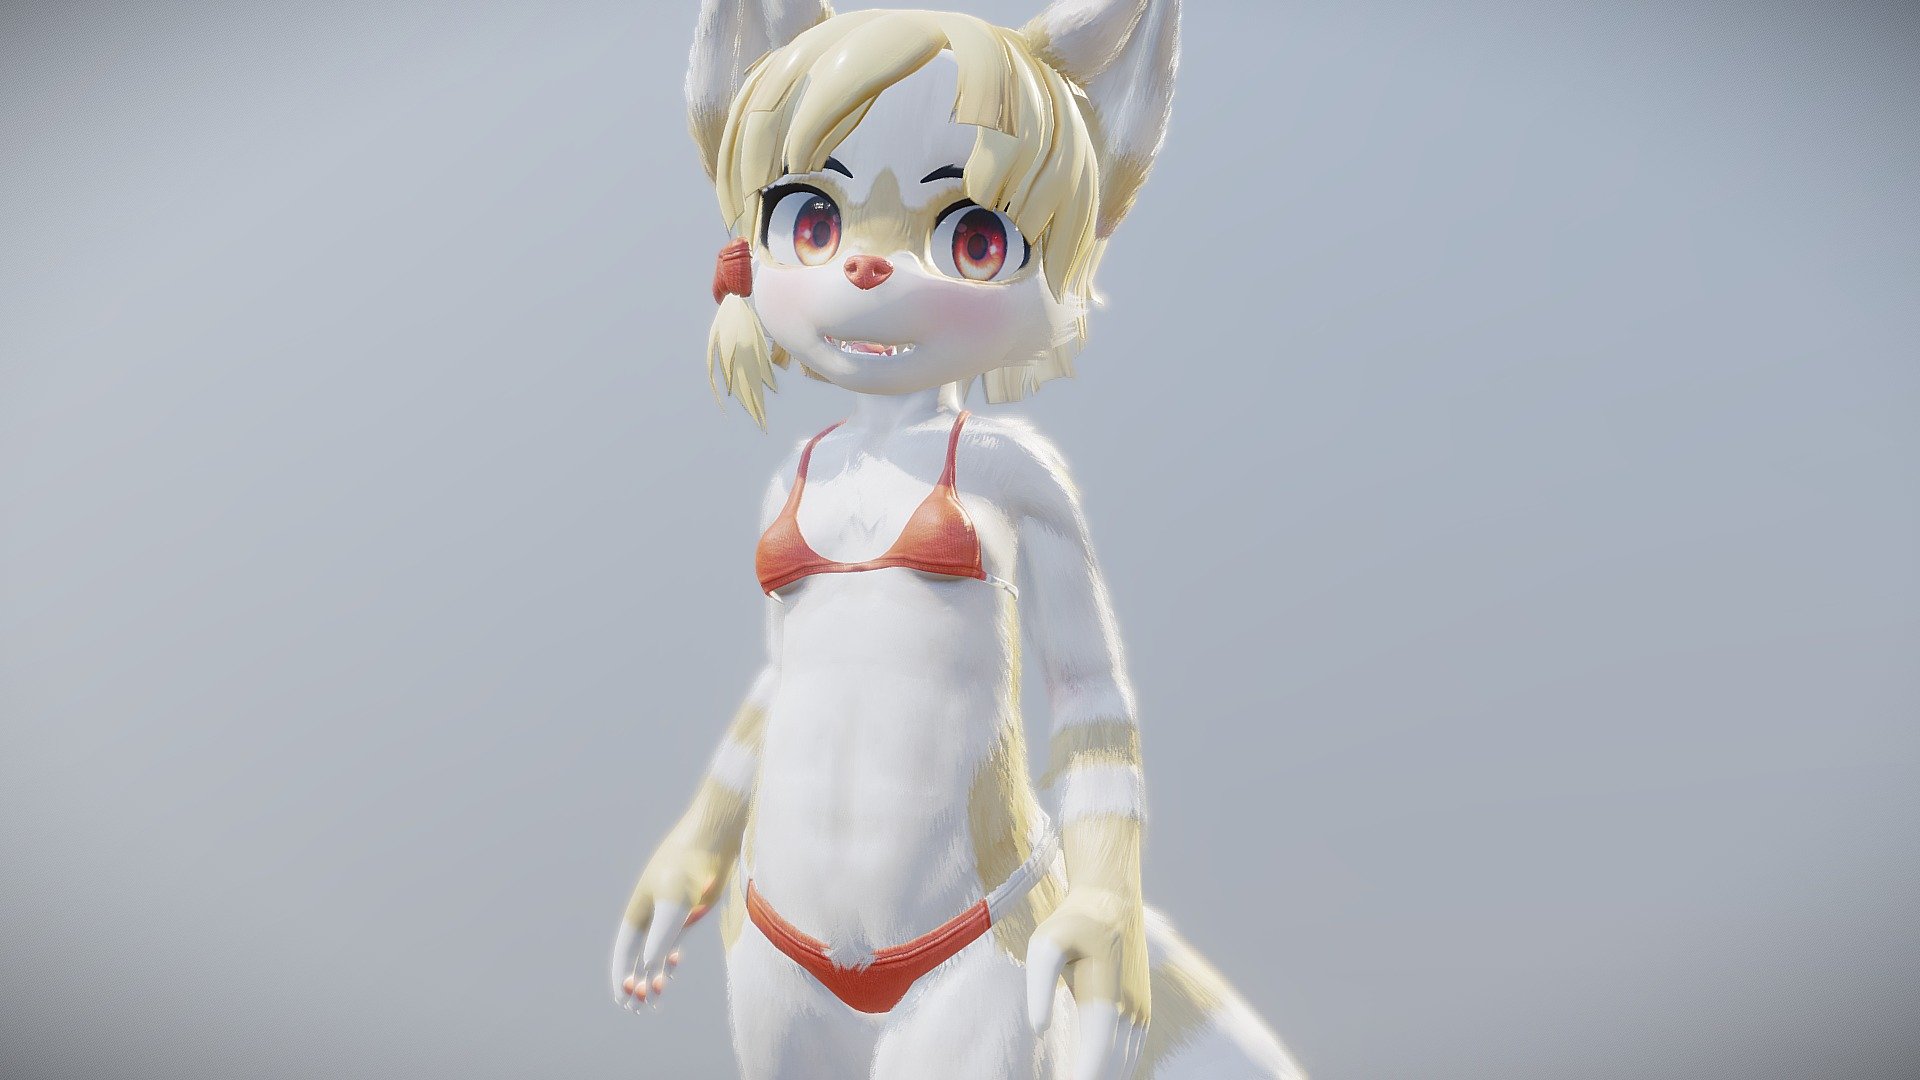 My OC Clarine Nix the Raccon. 
Commission info: https://www.furaffinity.net/commissions/hickysnow/
If you're intrested in a comission PM me on 
Discord: HickySnow#5313 - Clarine Nix (Beach Day) - 3D model by HickySnow (@Hicky_Snow) 3d model